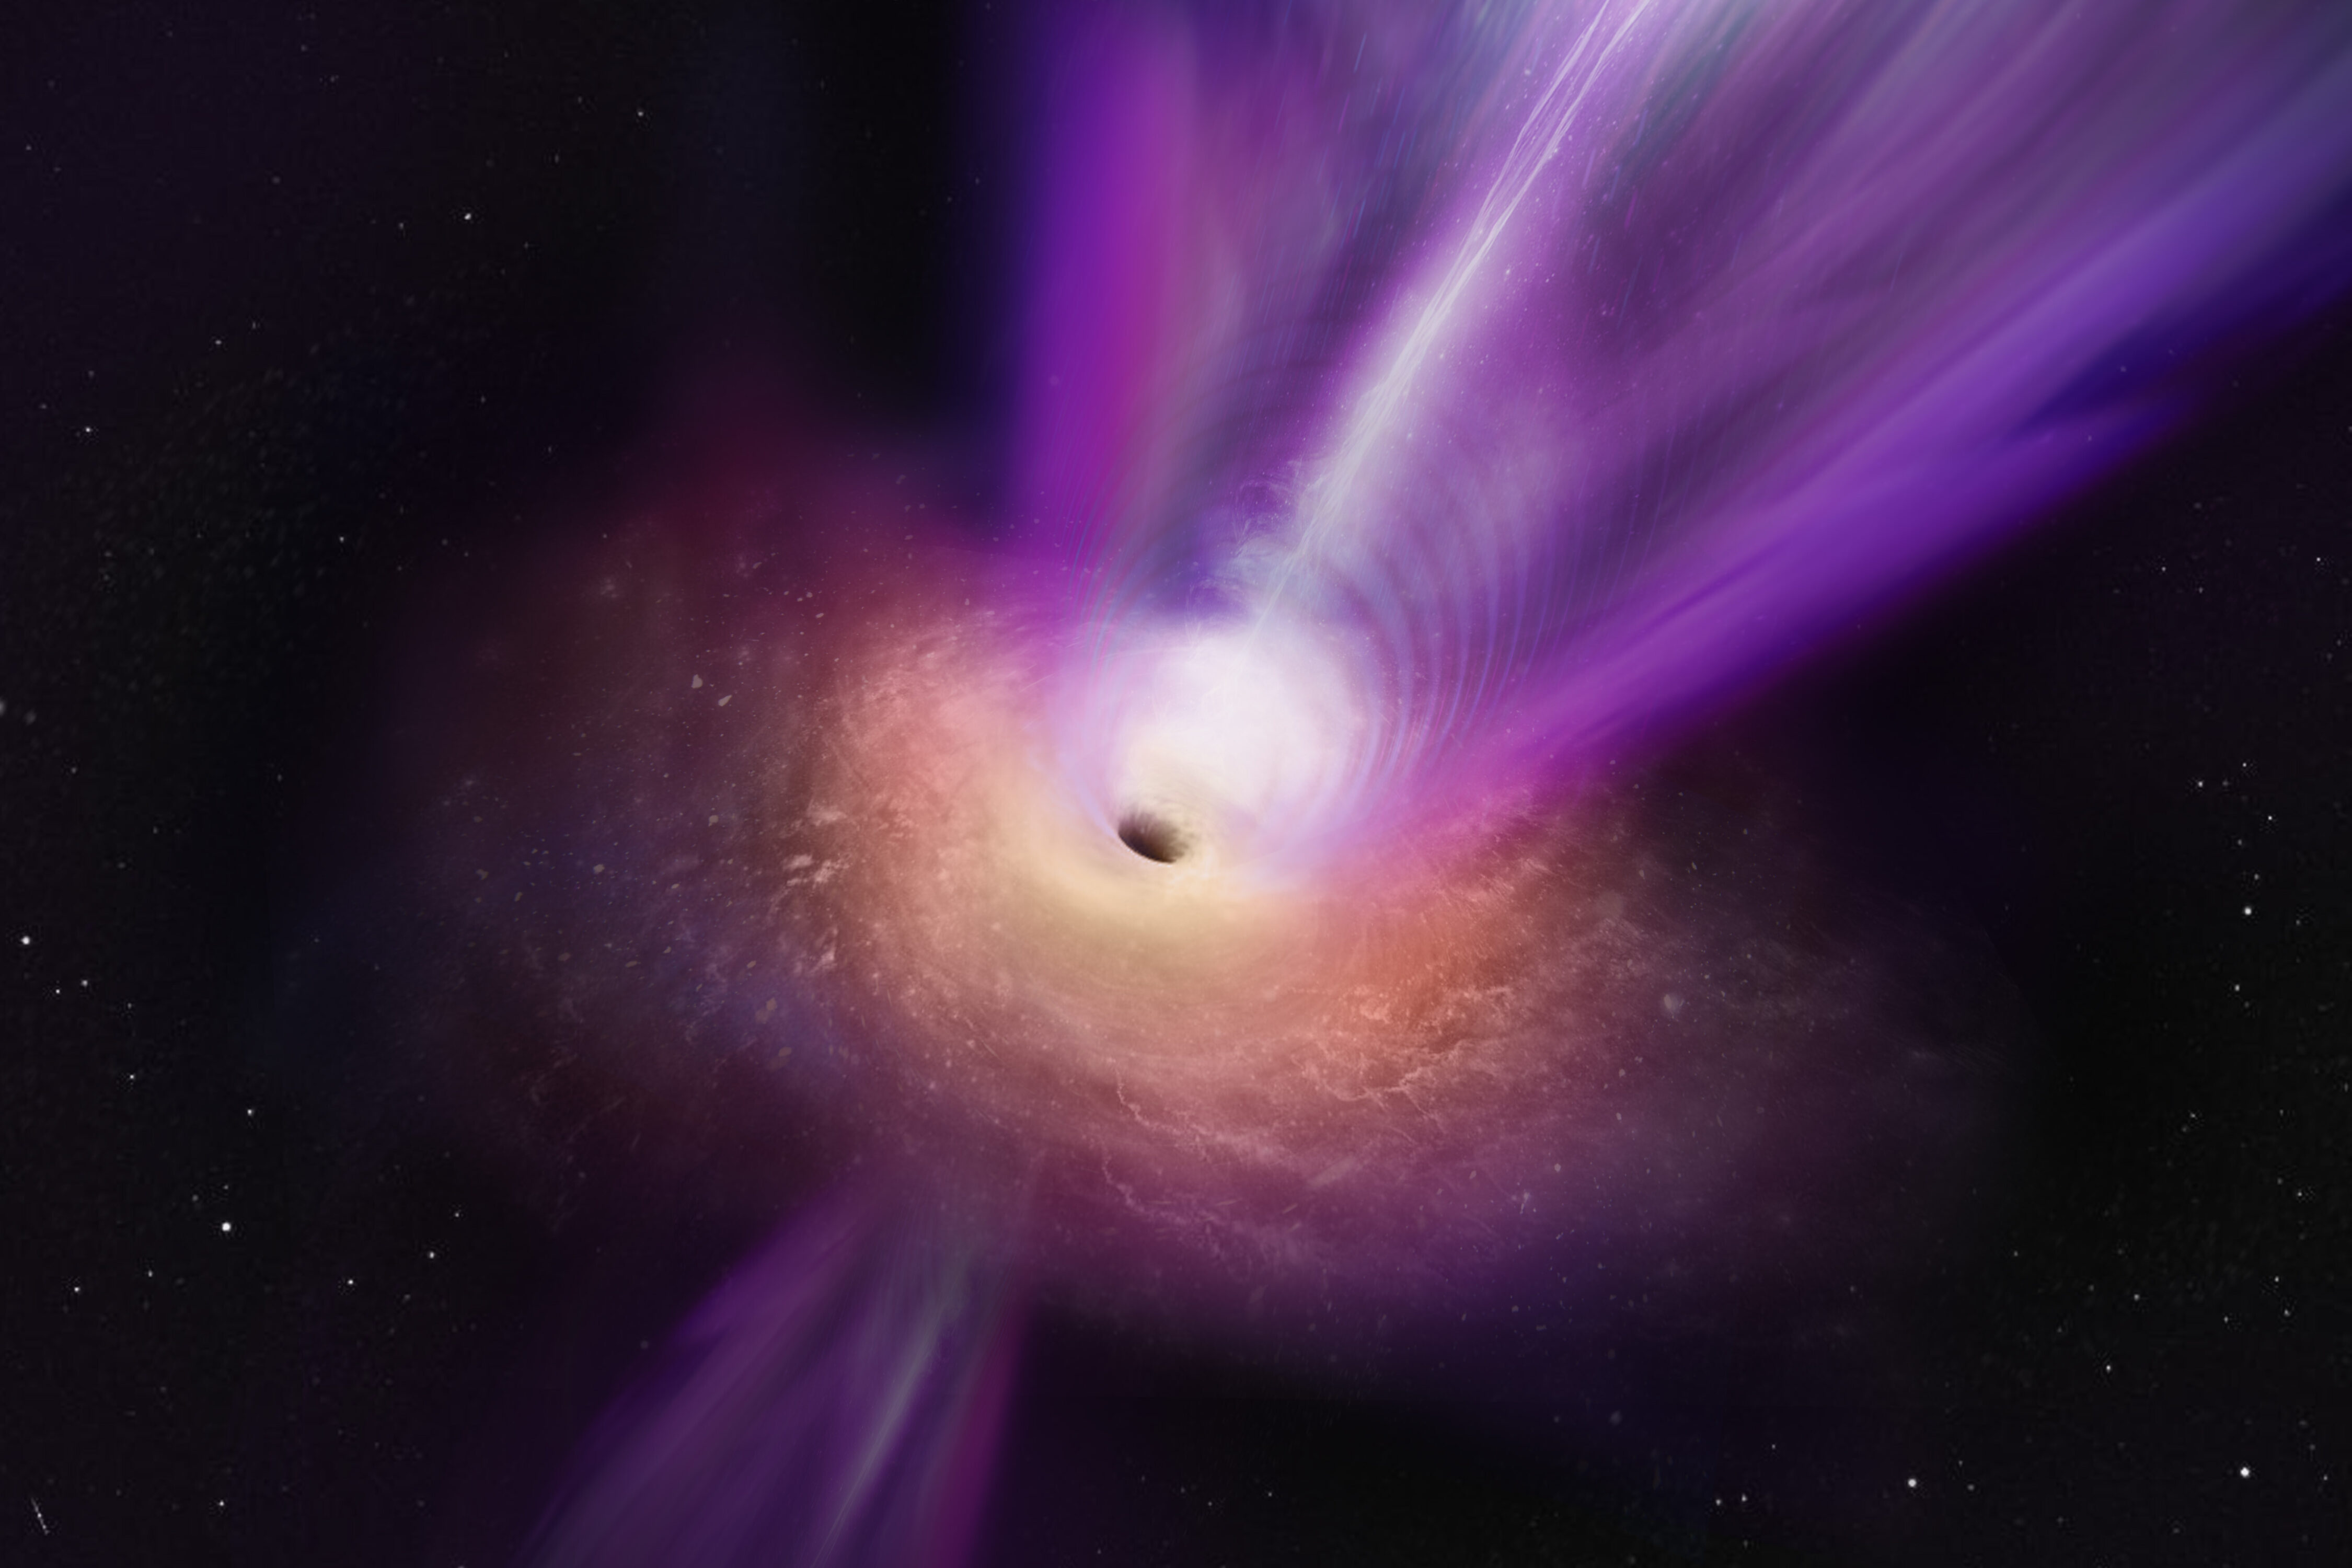 Scientists observing the compact radio core of M87 have discovered new details about the galaxy’s supermassive black hole. In this artist’s conception, the black hole’s massive jet is seen rising up from the centre of the black hole. The observations on which this illustration is based represent the first time that the jet and the black hole shadow have been imaged together, giving scientists new insights into how black holes can launch these powerful jets. Credit: S. Dagnello (NRAO/AUI/NSF)